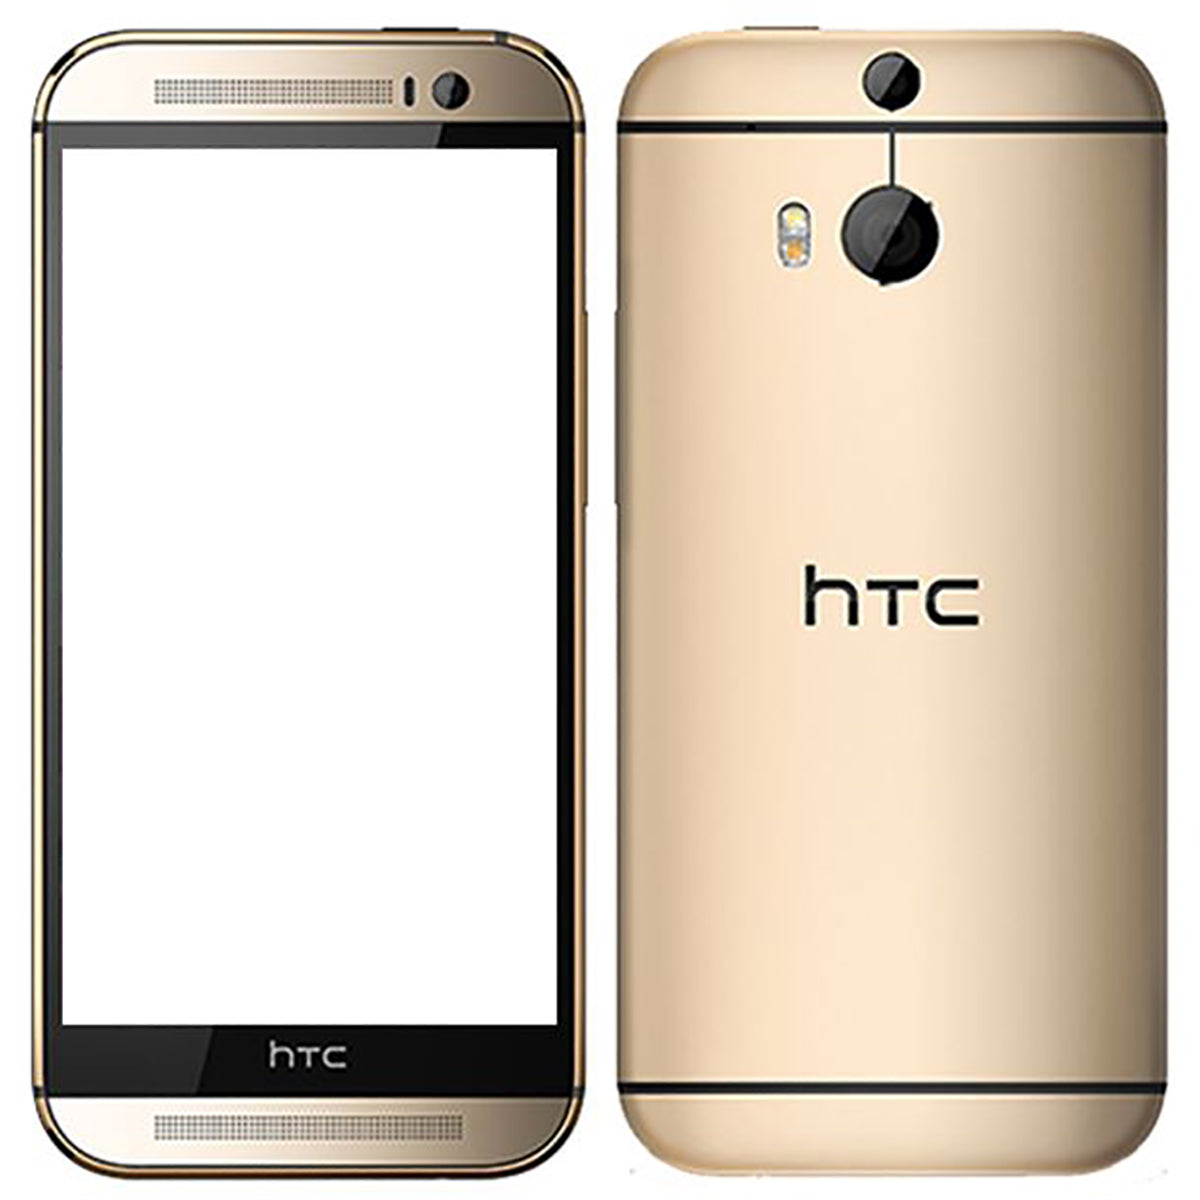 HTC One M8 Refurbished and Unlocked HTC